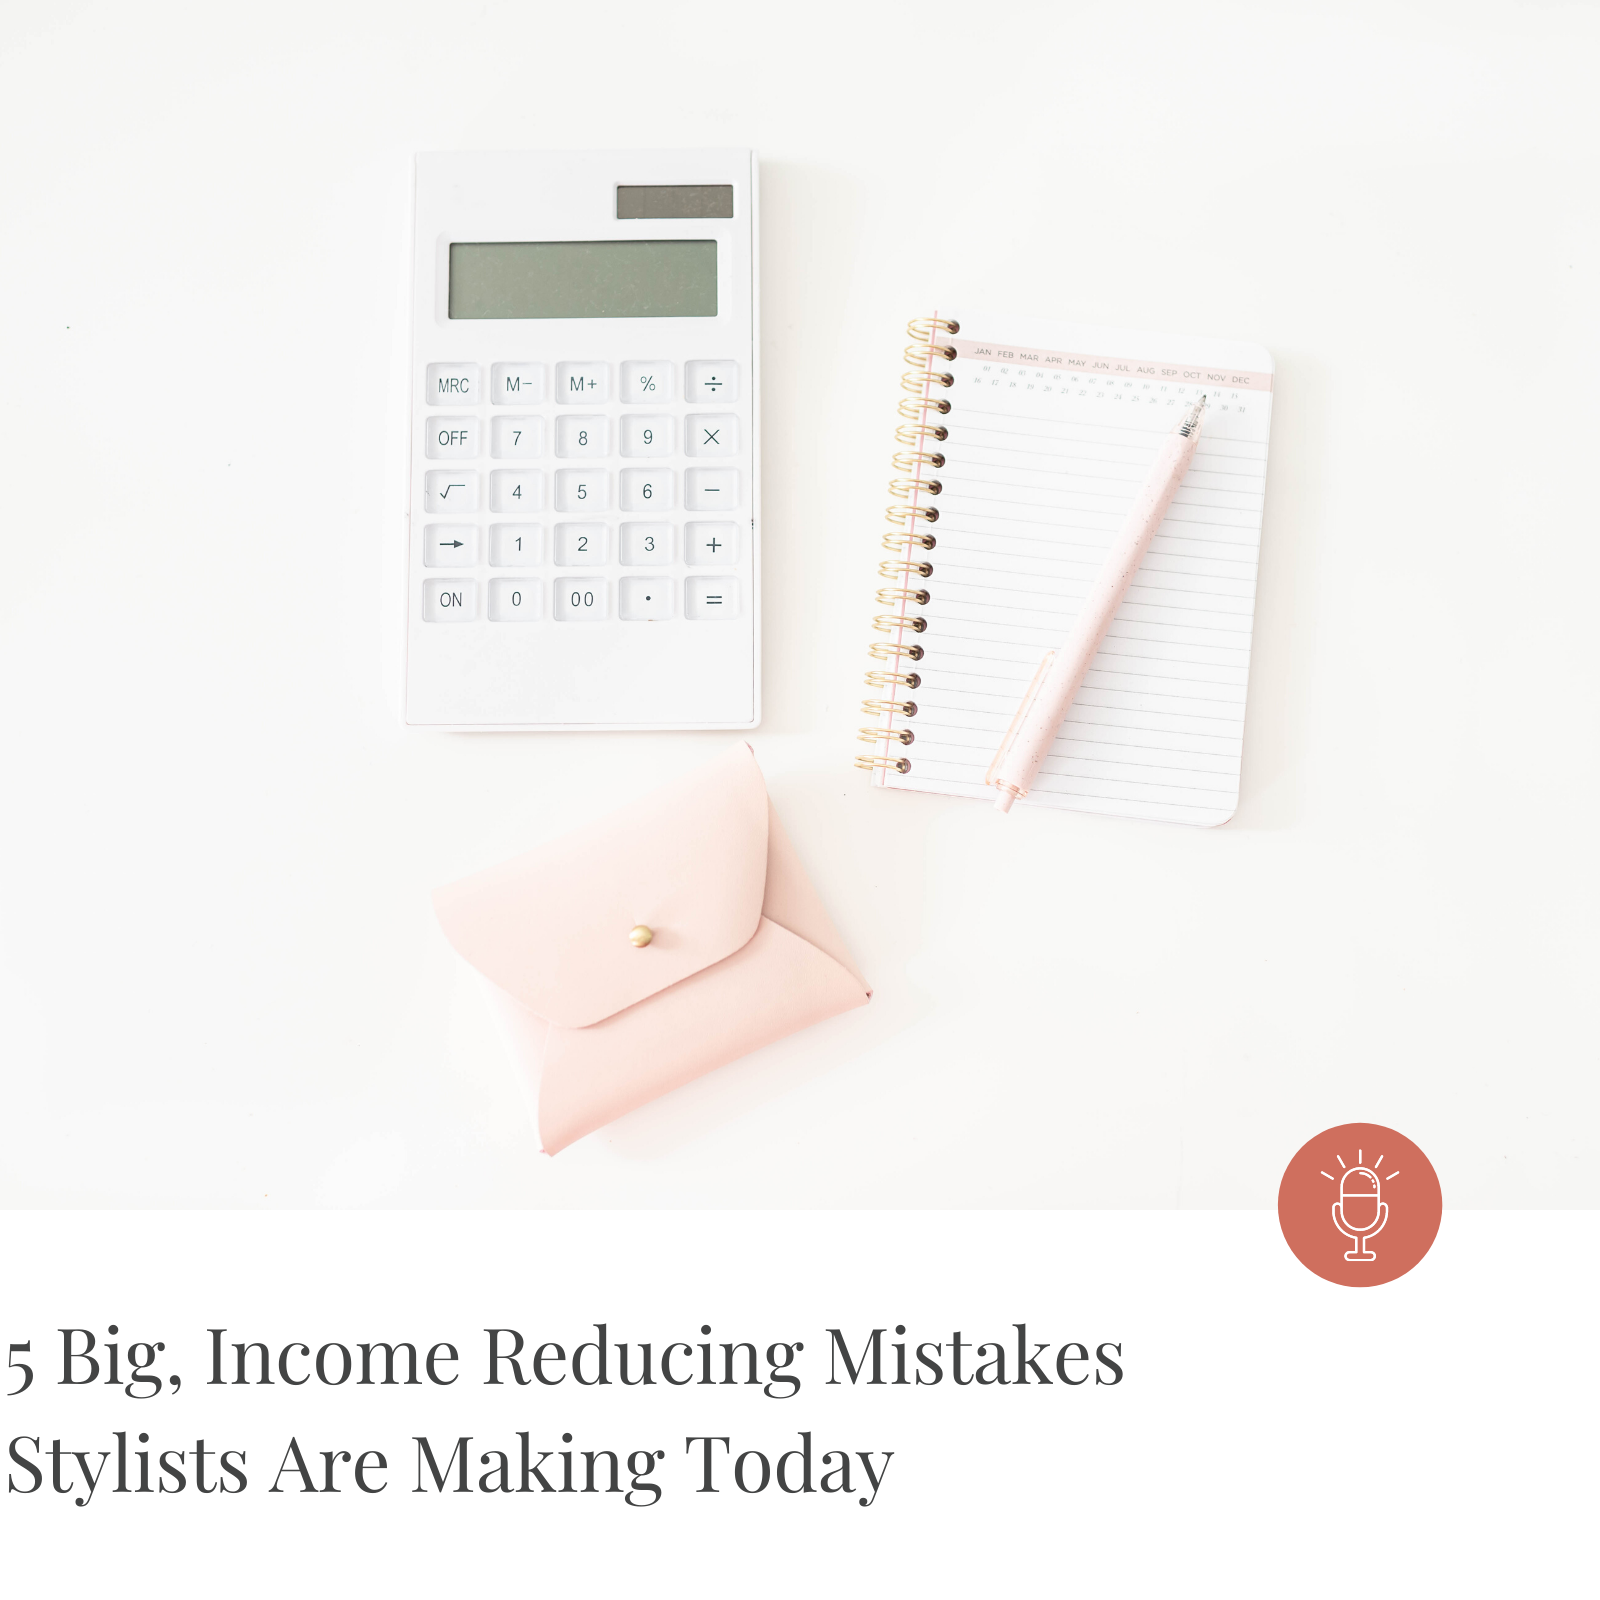 Episode #181 - 5 Big, Income Reducing Mistakes Stylists Are Making Today